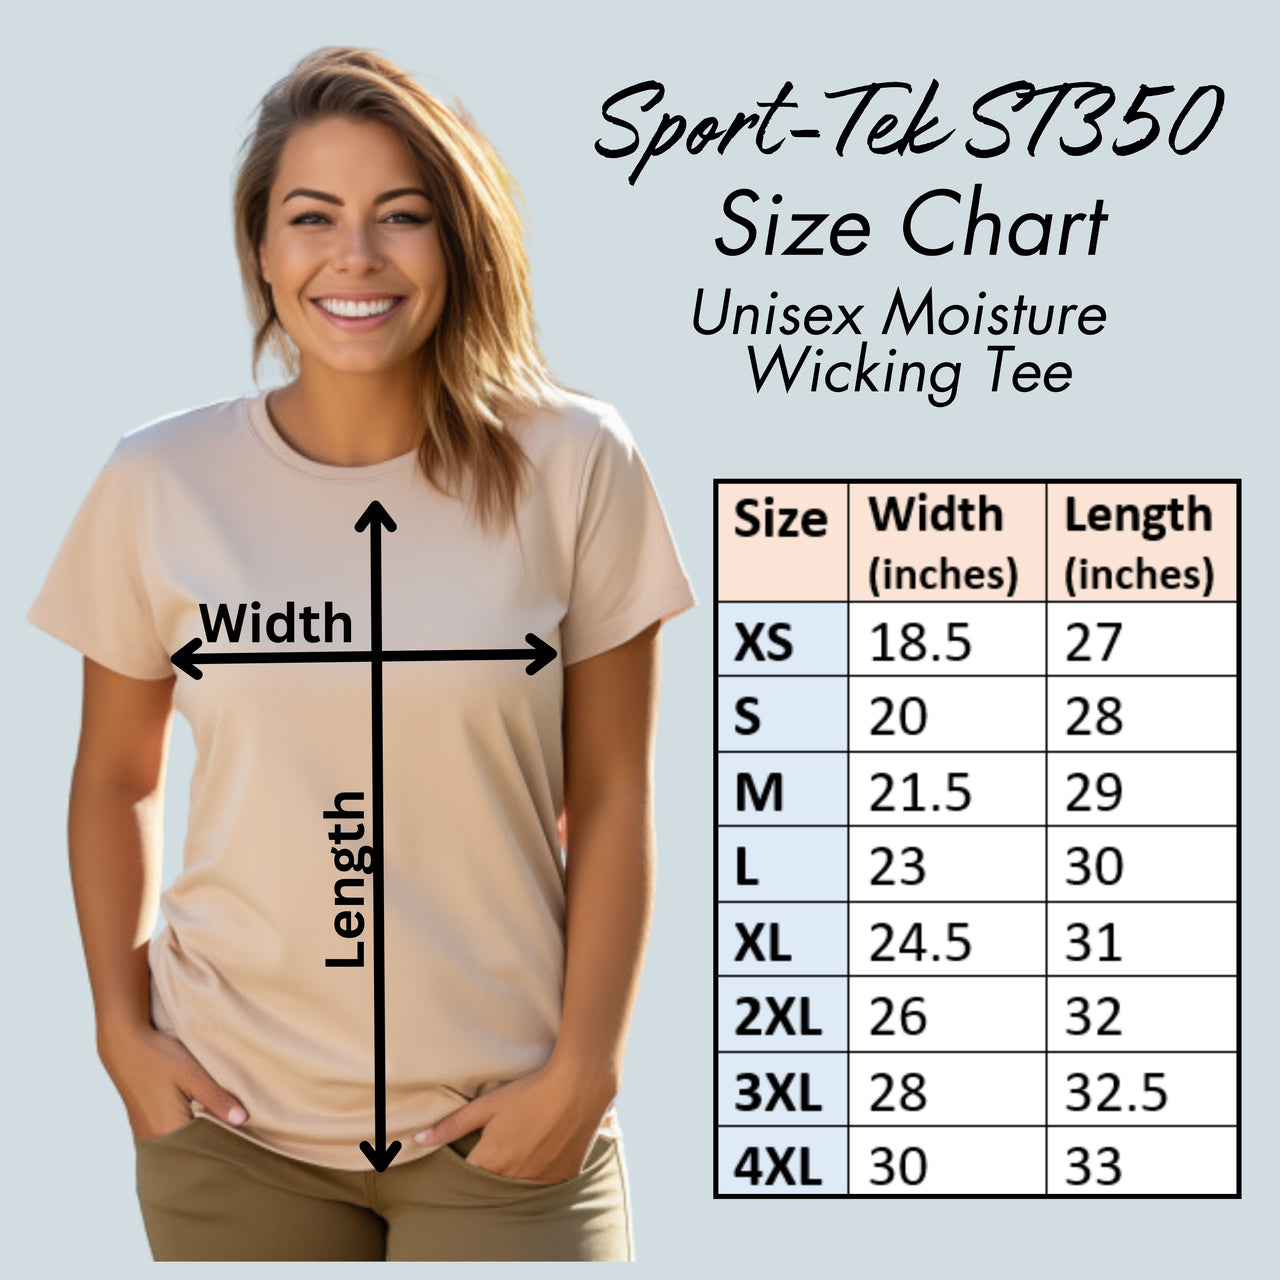 Unisex Moisture Wicking Tee OB Life Is Magical